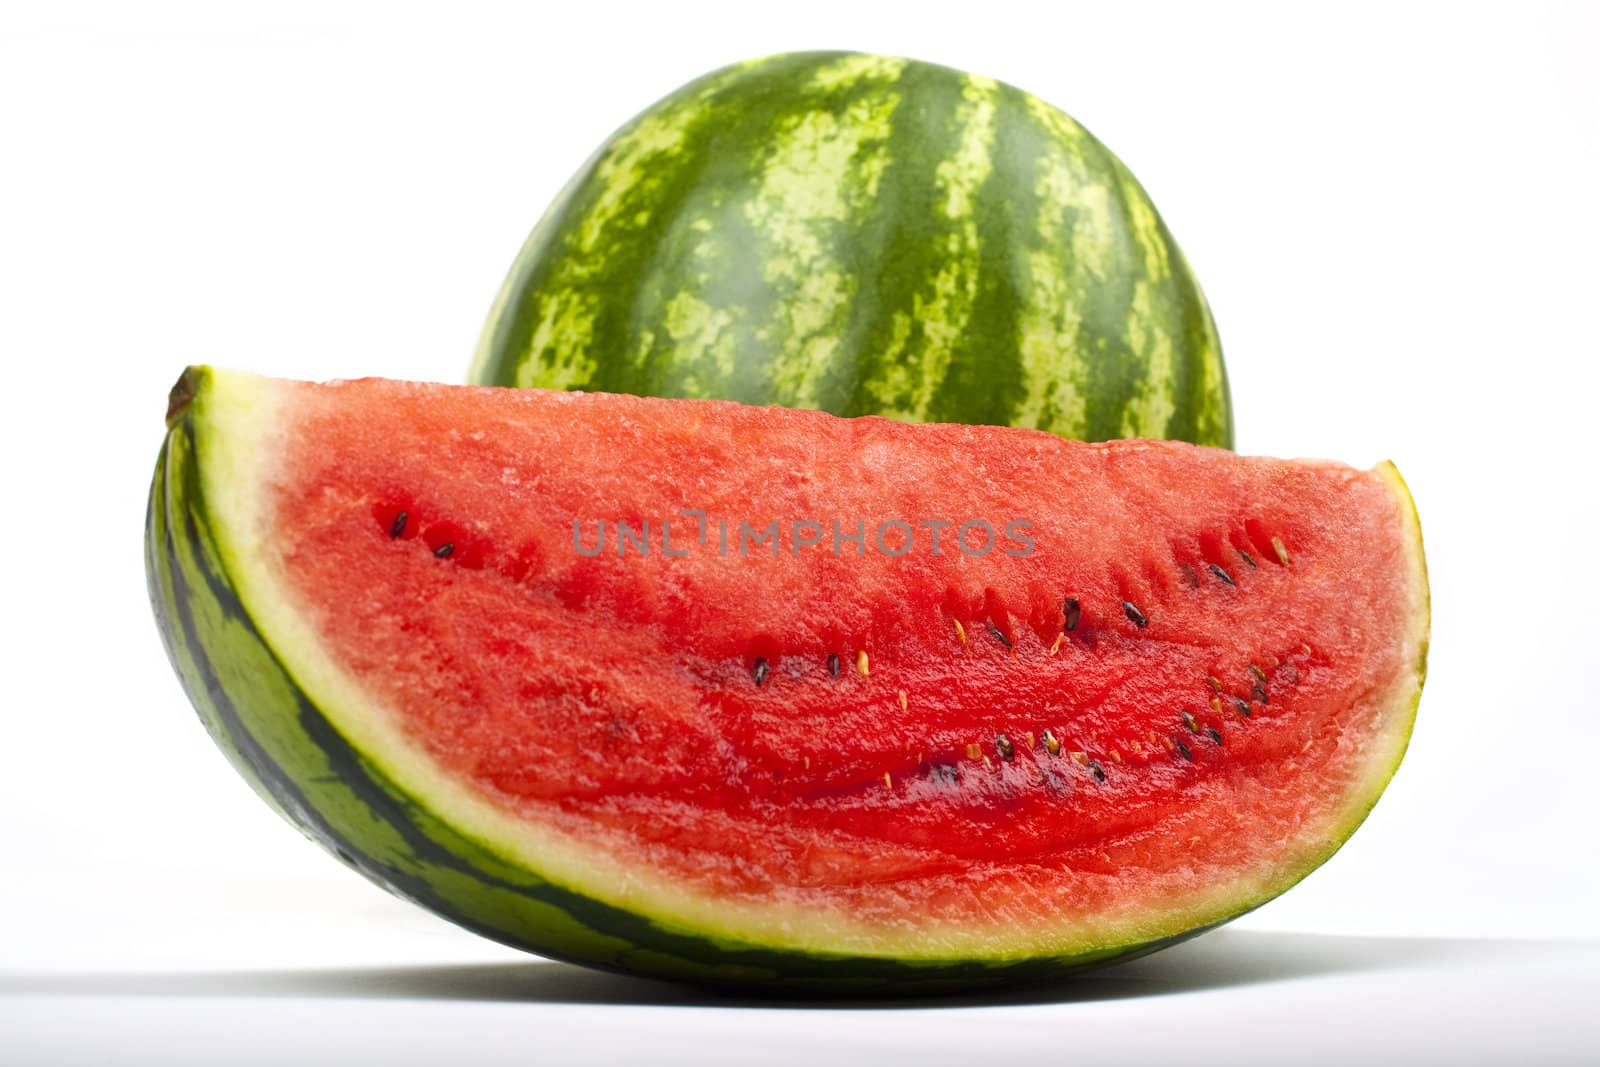 Watermelon on a white background.